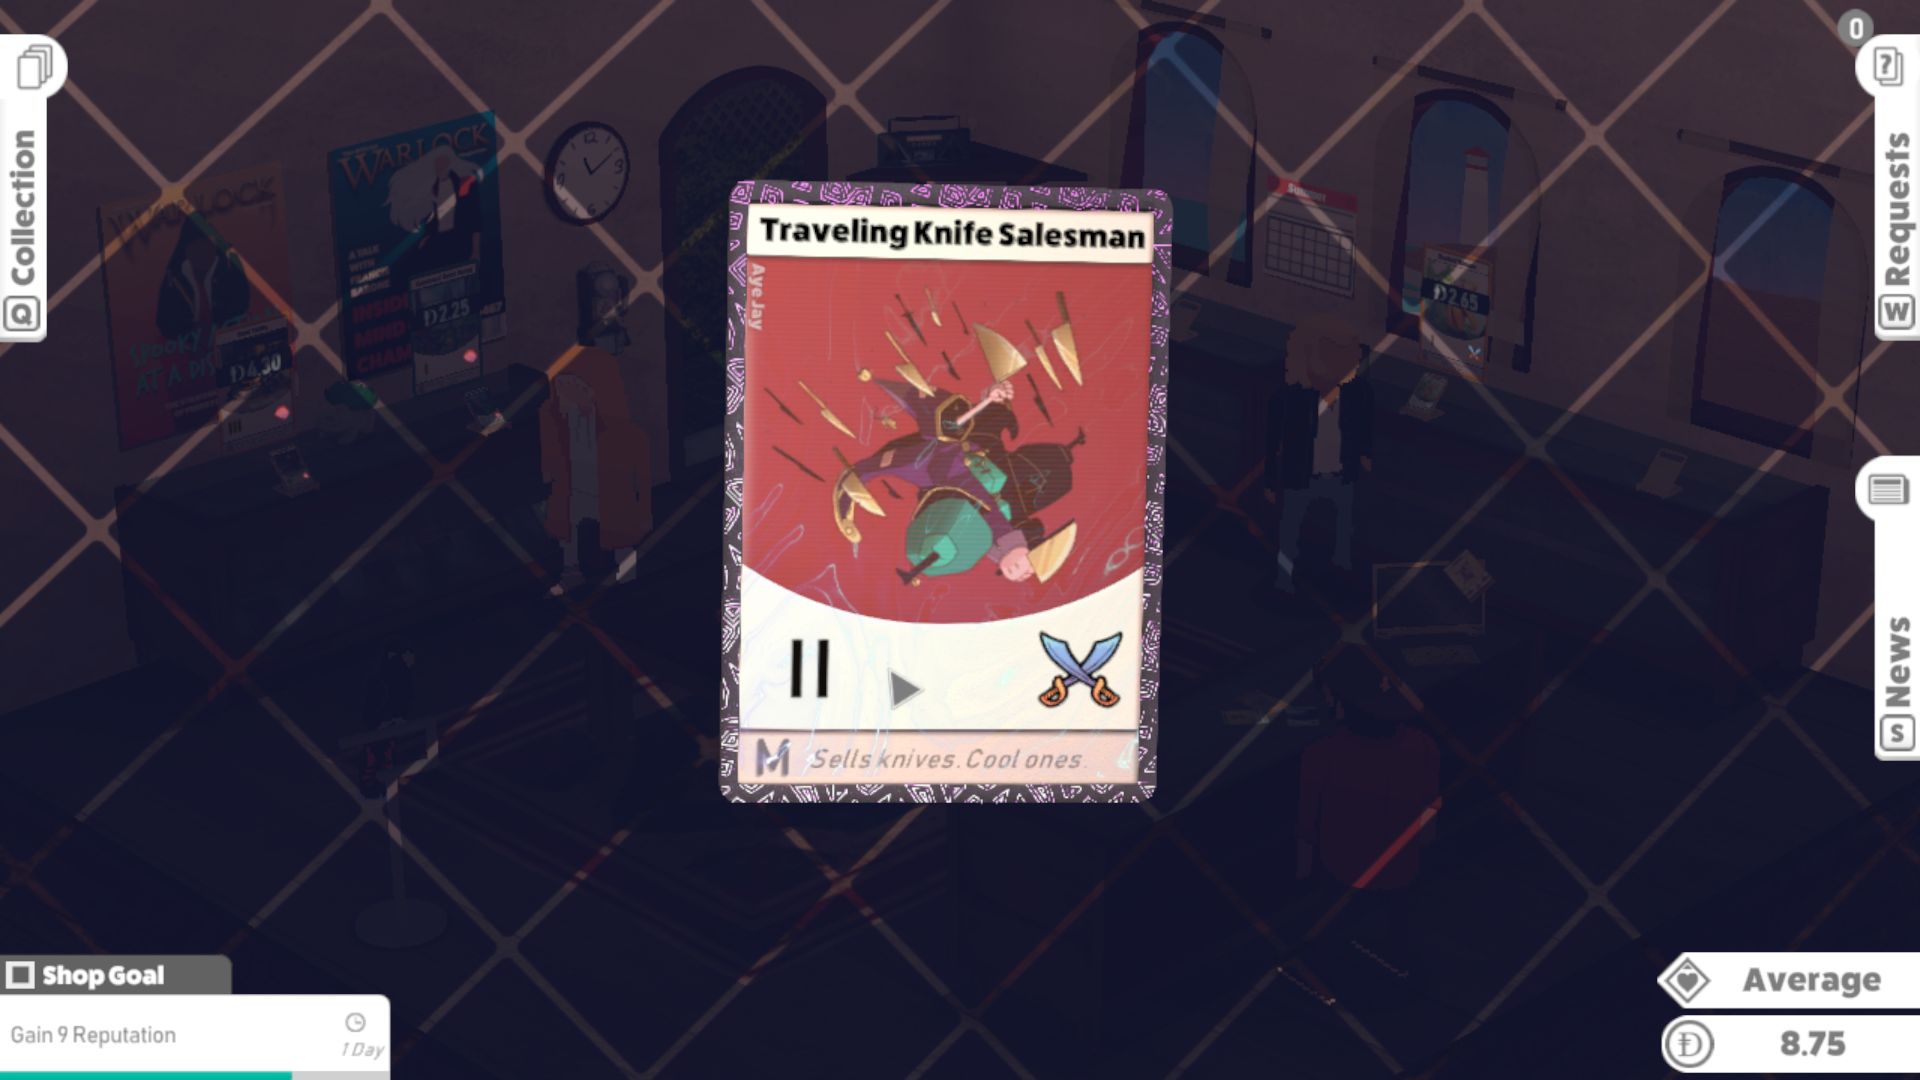 A single trading card (in the vein of Magic: The Gathering) from the game Kardboard Kings, depicting the Traveling Knife Salesman, an energetic hooded figure wearing a purple caped coat and puffy green trousers, doing the splits in mid air as various kitchen knives rain down. The salesman appears to be holding a knife in an arm sticking straight out of their hood